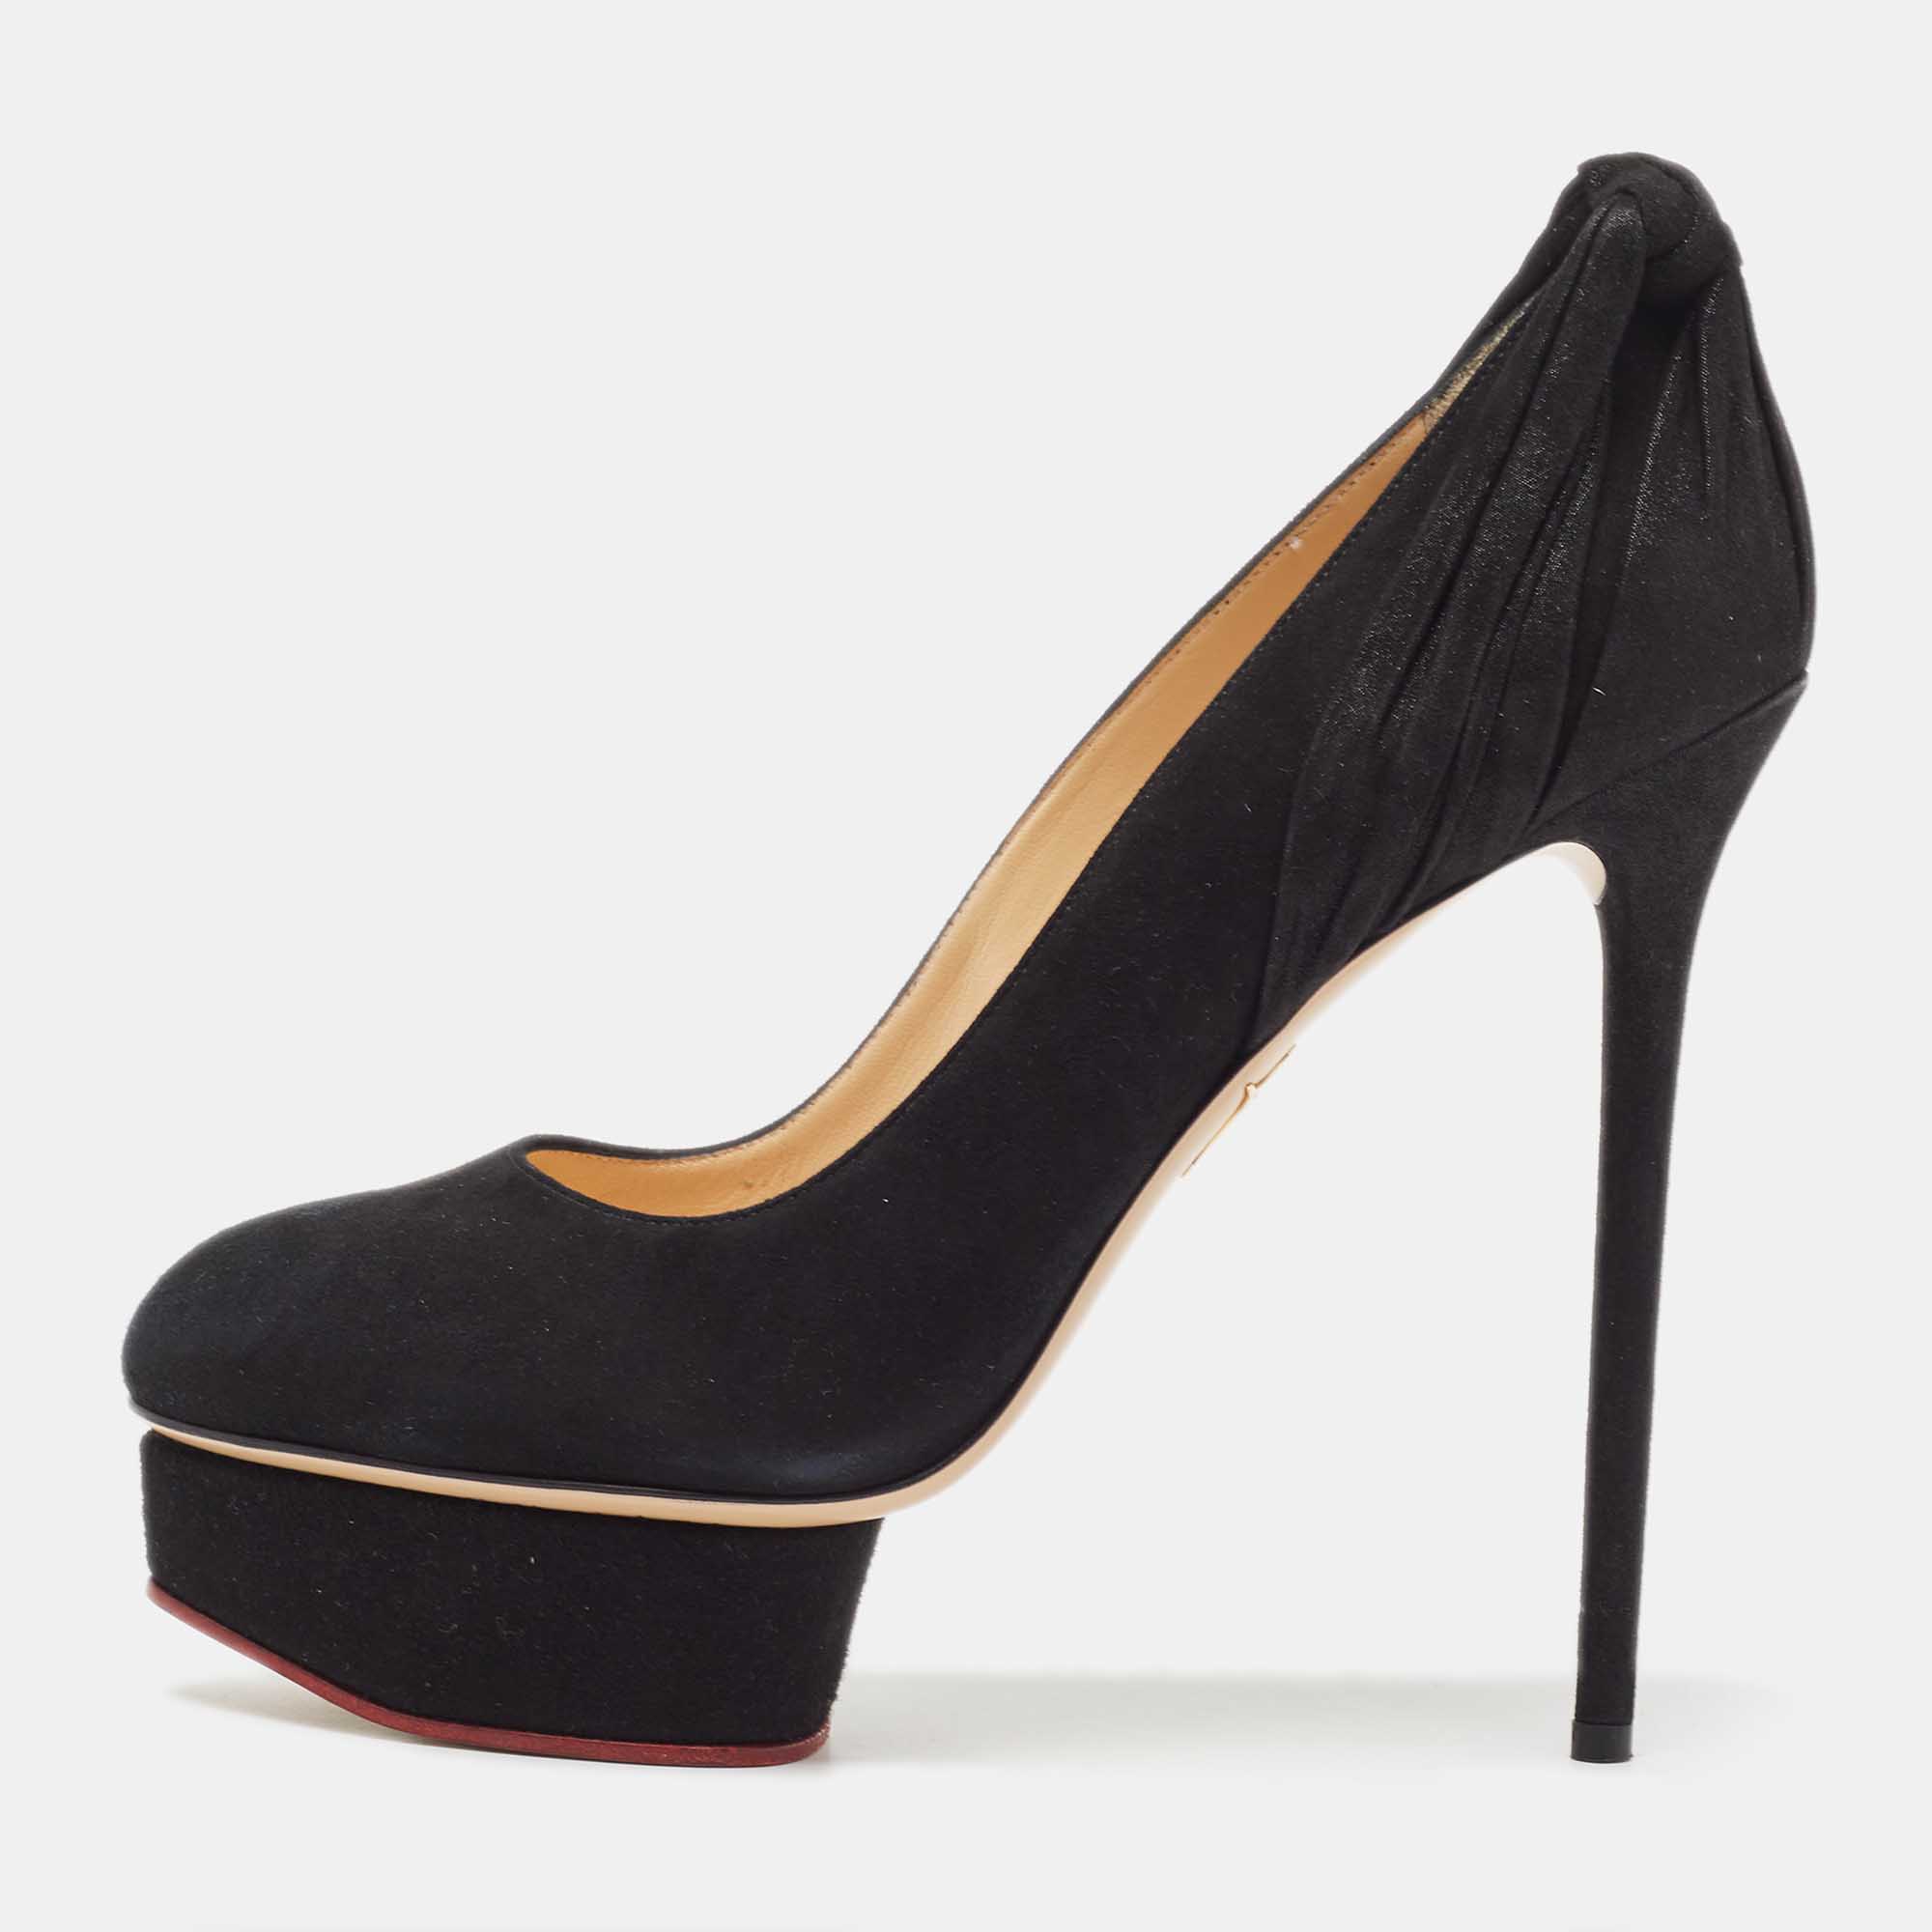 Pre-owned Charlotte Olympia Black Suede Josephine Platform Pumps Size 41